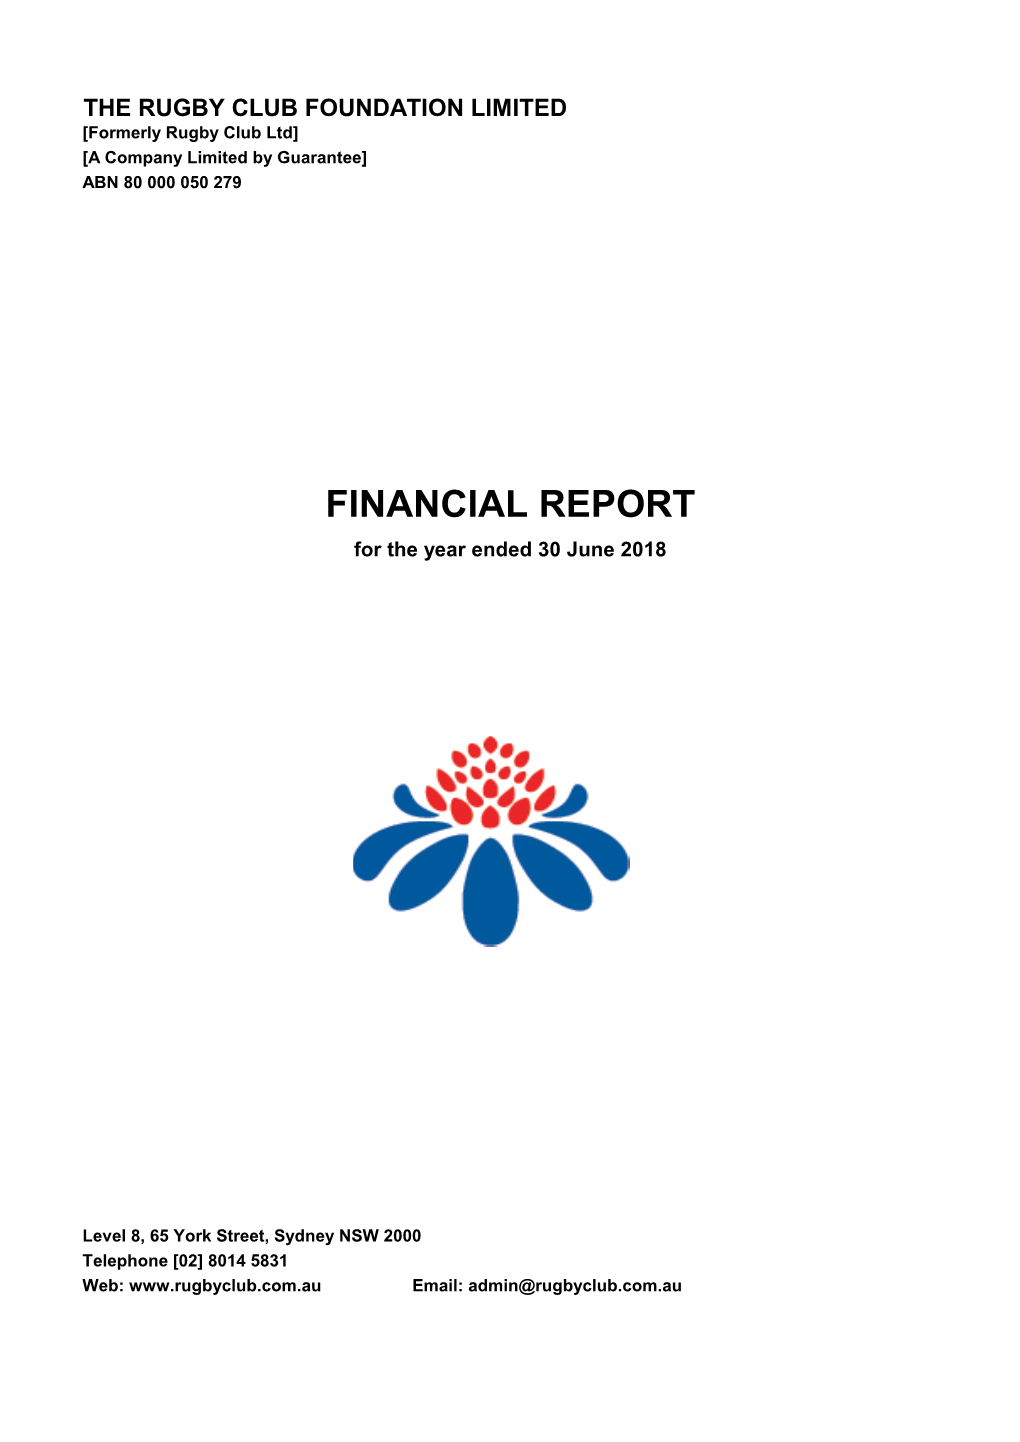 The Rugby Club Foundation Limited Financial Report 2018